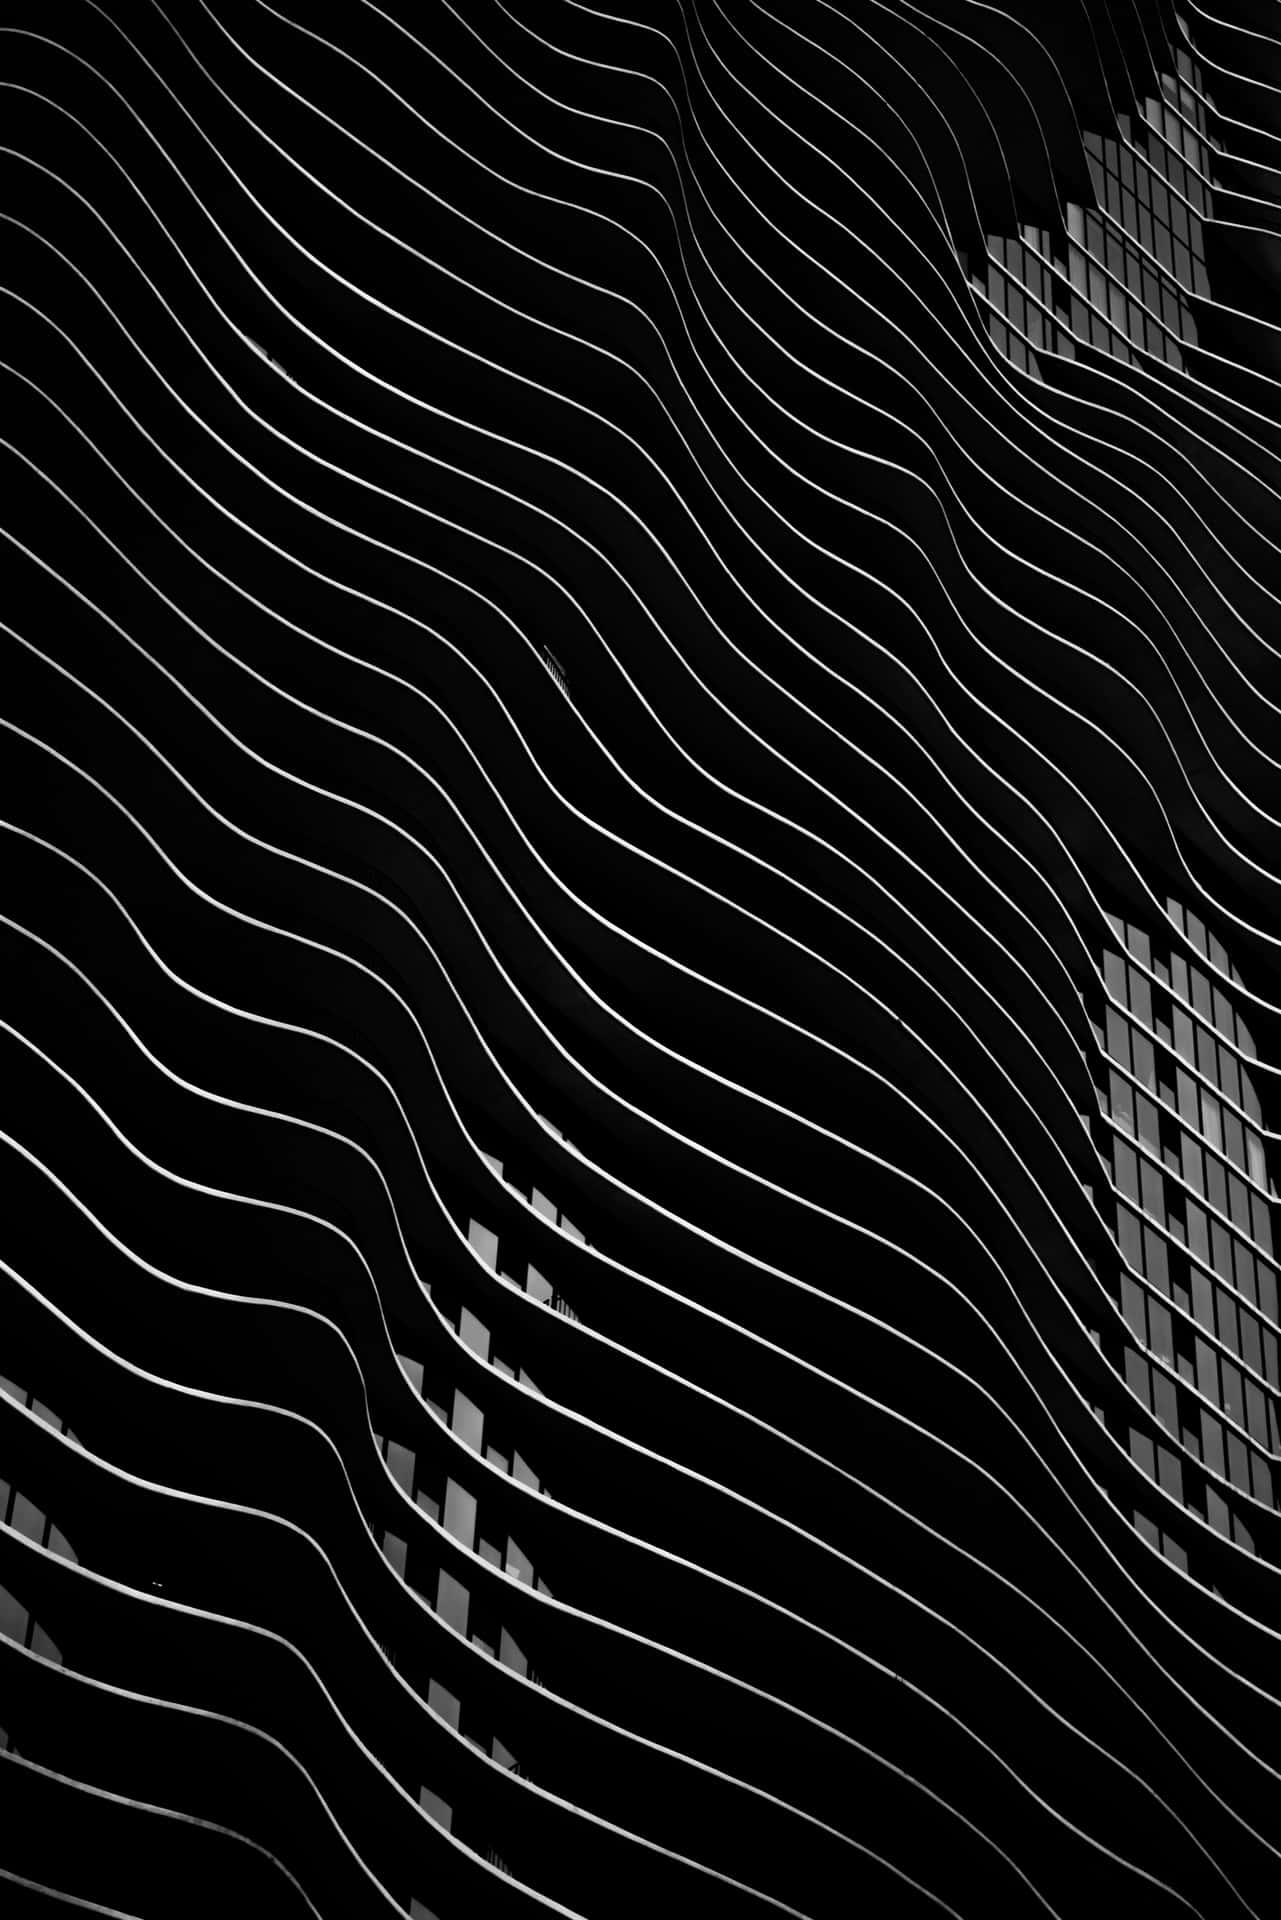 Black Ipad Of Building With Abstract Architectural Design Wallpaper